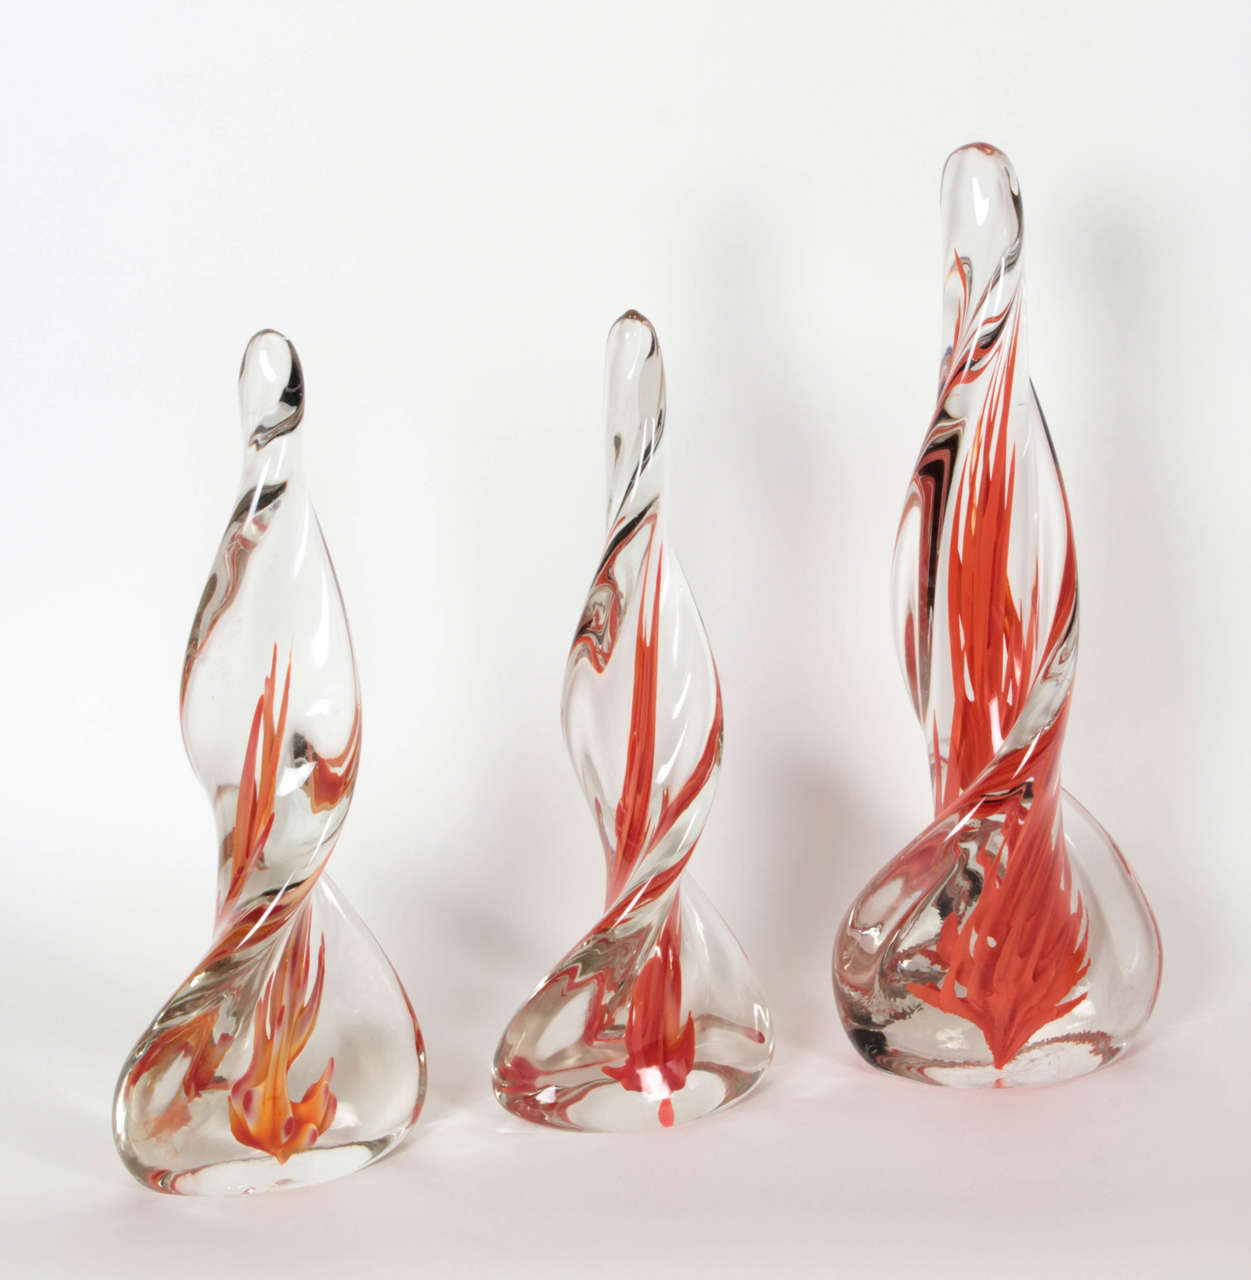 A set of three spiraling clear-glass obelisks with red flame-like intrusions by Venini. All bearing faint acid-etched stamps that date them to the 1950s.  They are 17, 14 1/4, and 14 inches tall each, and the bases are 6 1/2, 5 1/2, and 5 inches